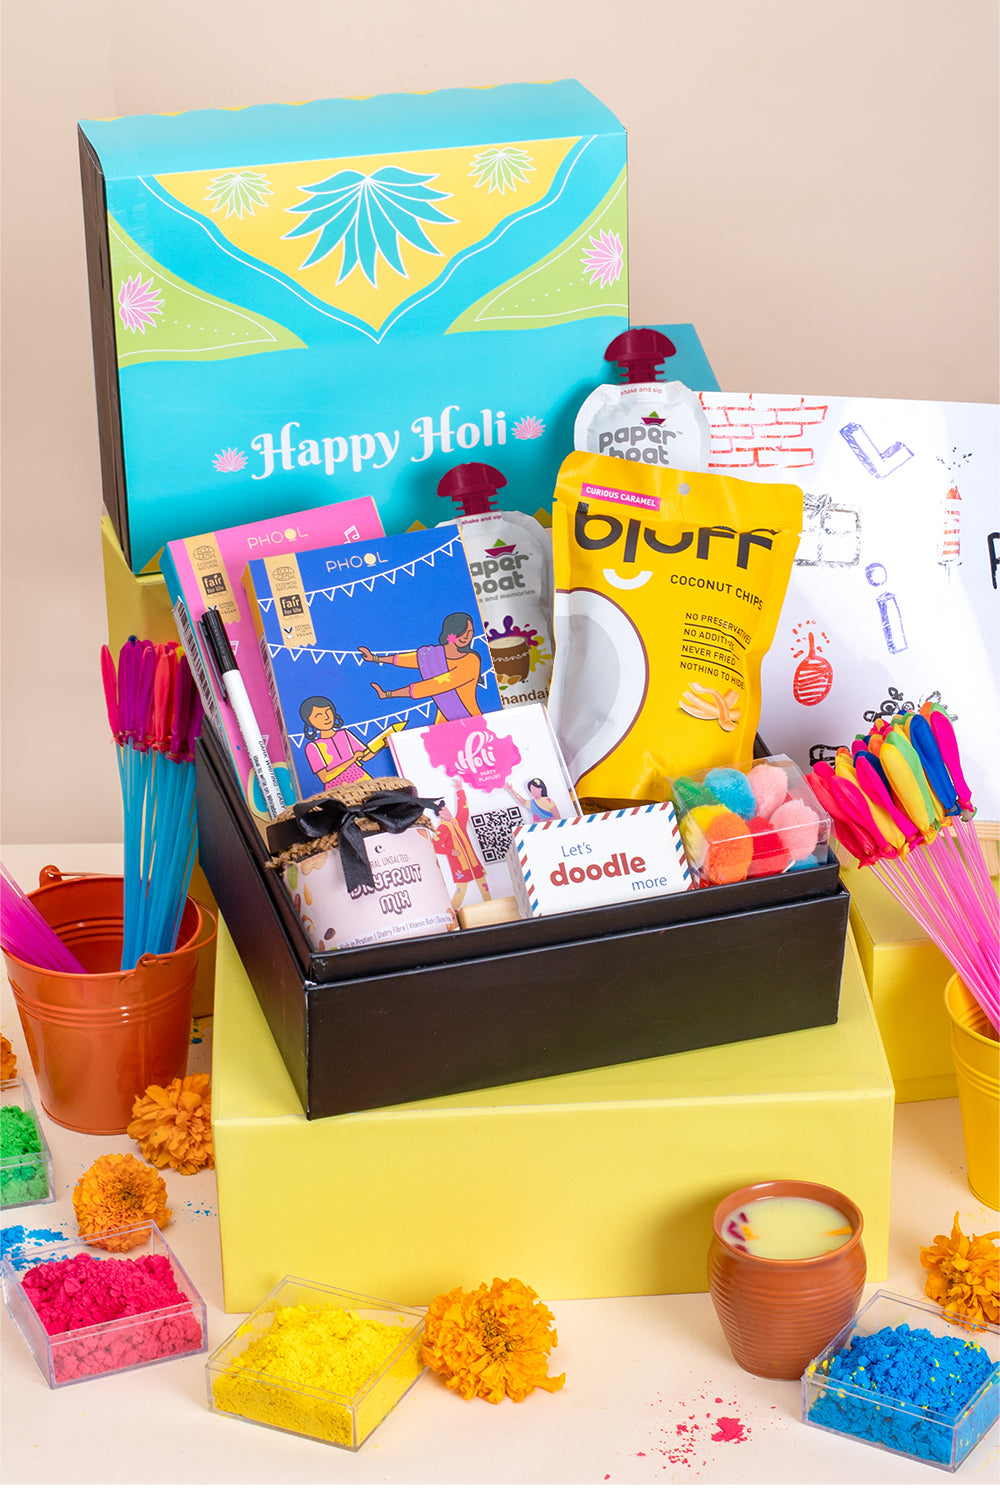 Healthy Corporate Gift Hampers: Ideas for Workplace Wellness – The Good Road